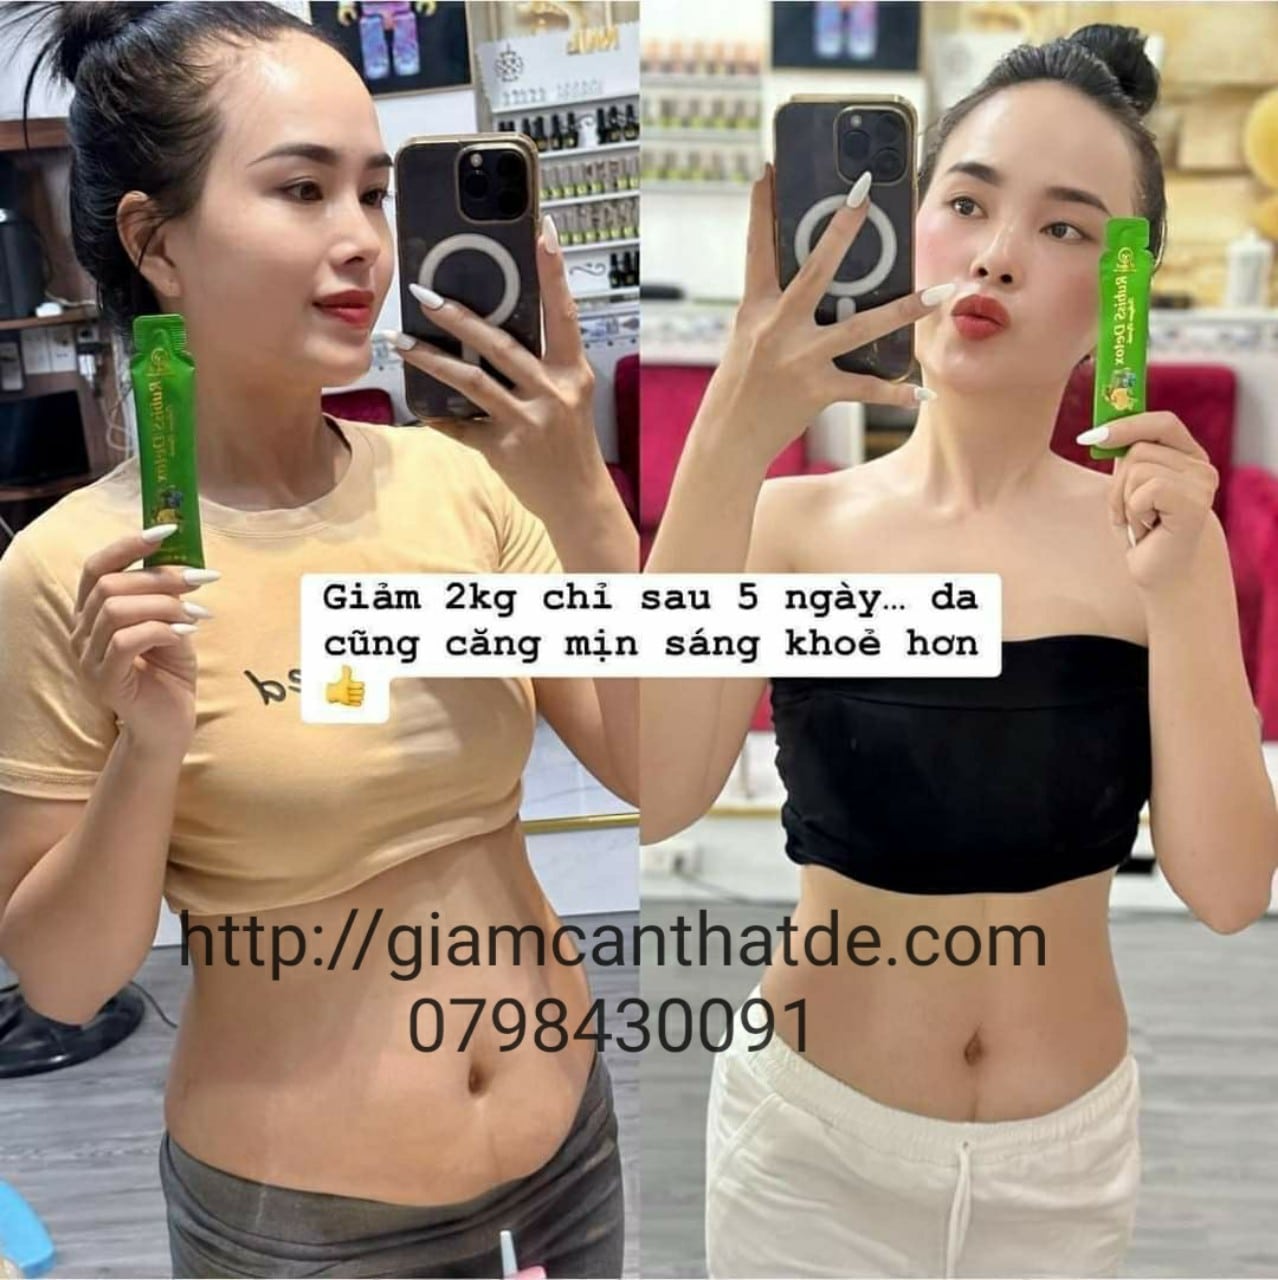 cach_su_dung_nuoc_giam_can_rubiss_dteox_plus_collagen